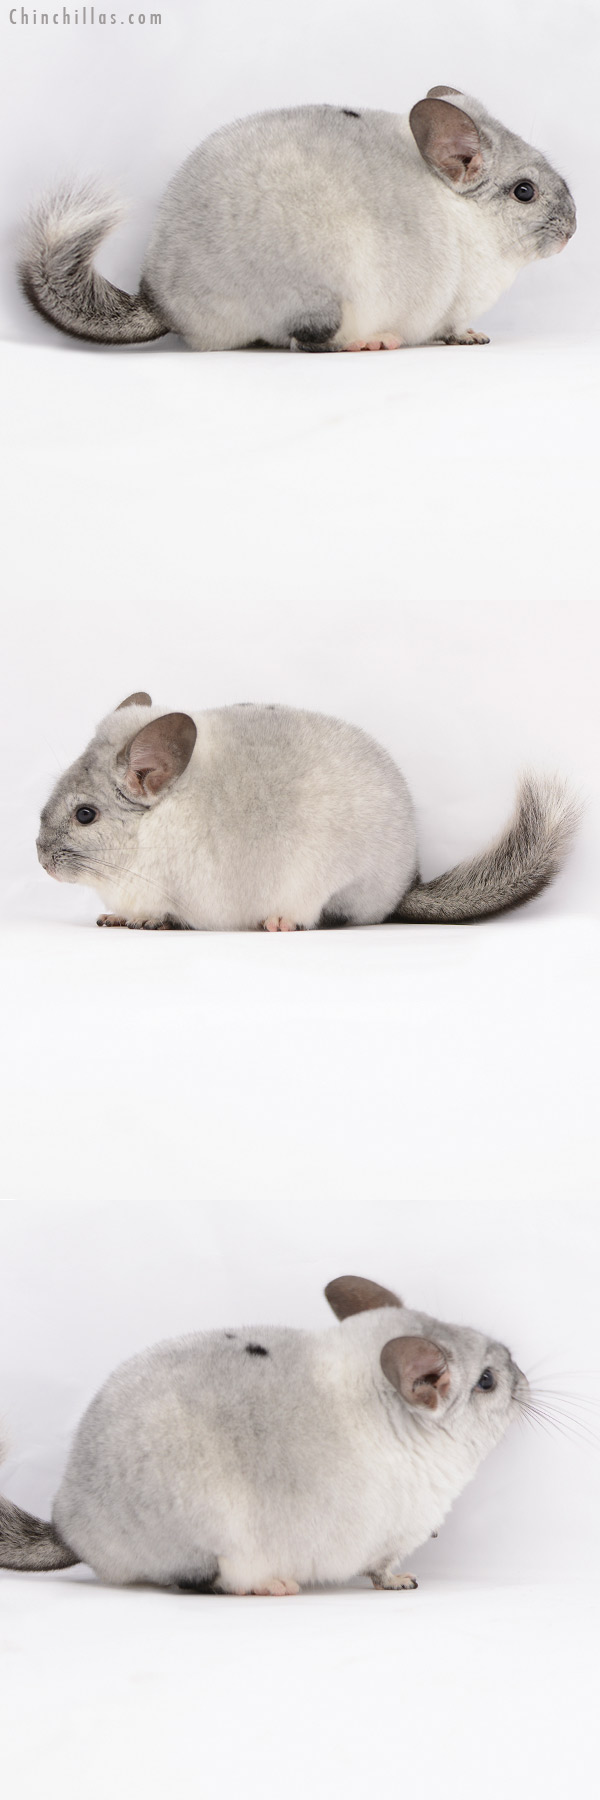 Chinchilla or related item offered for sale or export on Chinchillas.com - 20208 Large Herd Improvement Quality Silver Mosaic Male Chinchilla